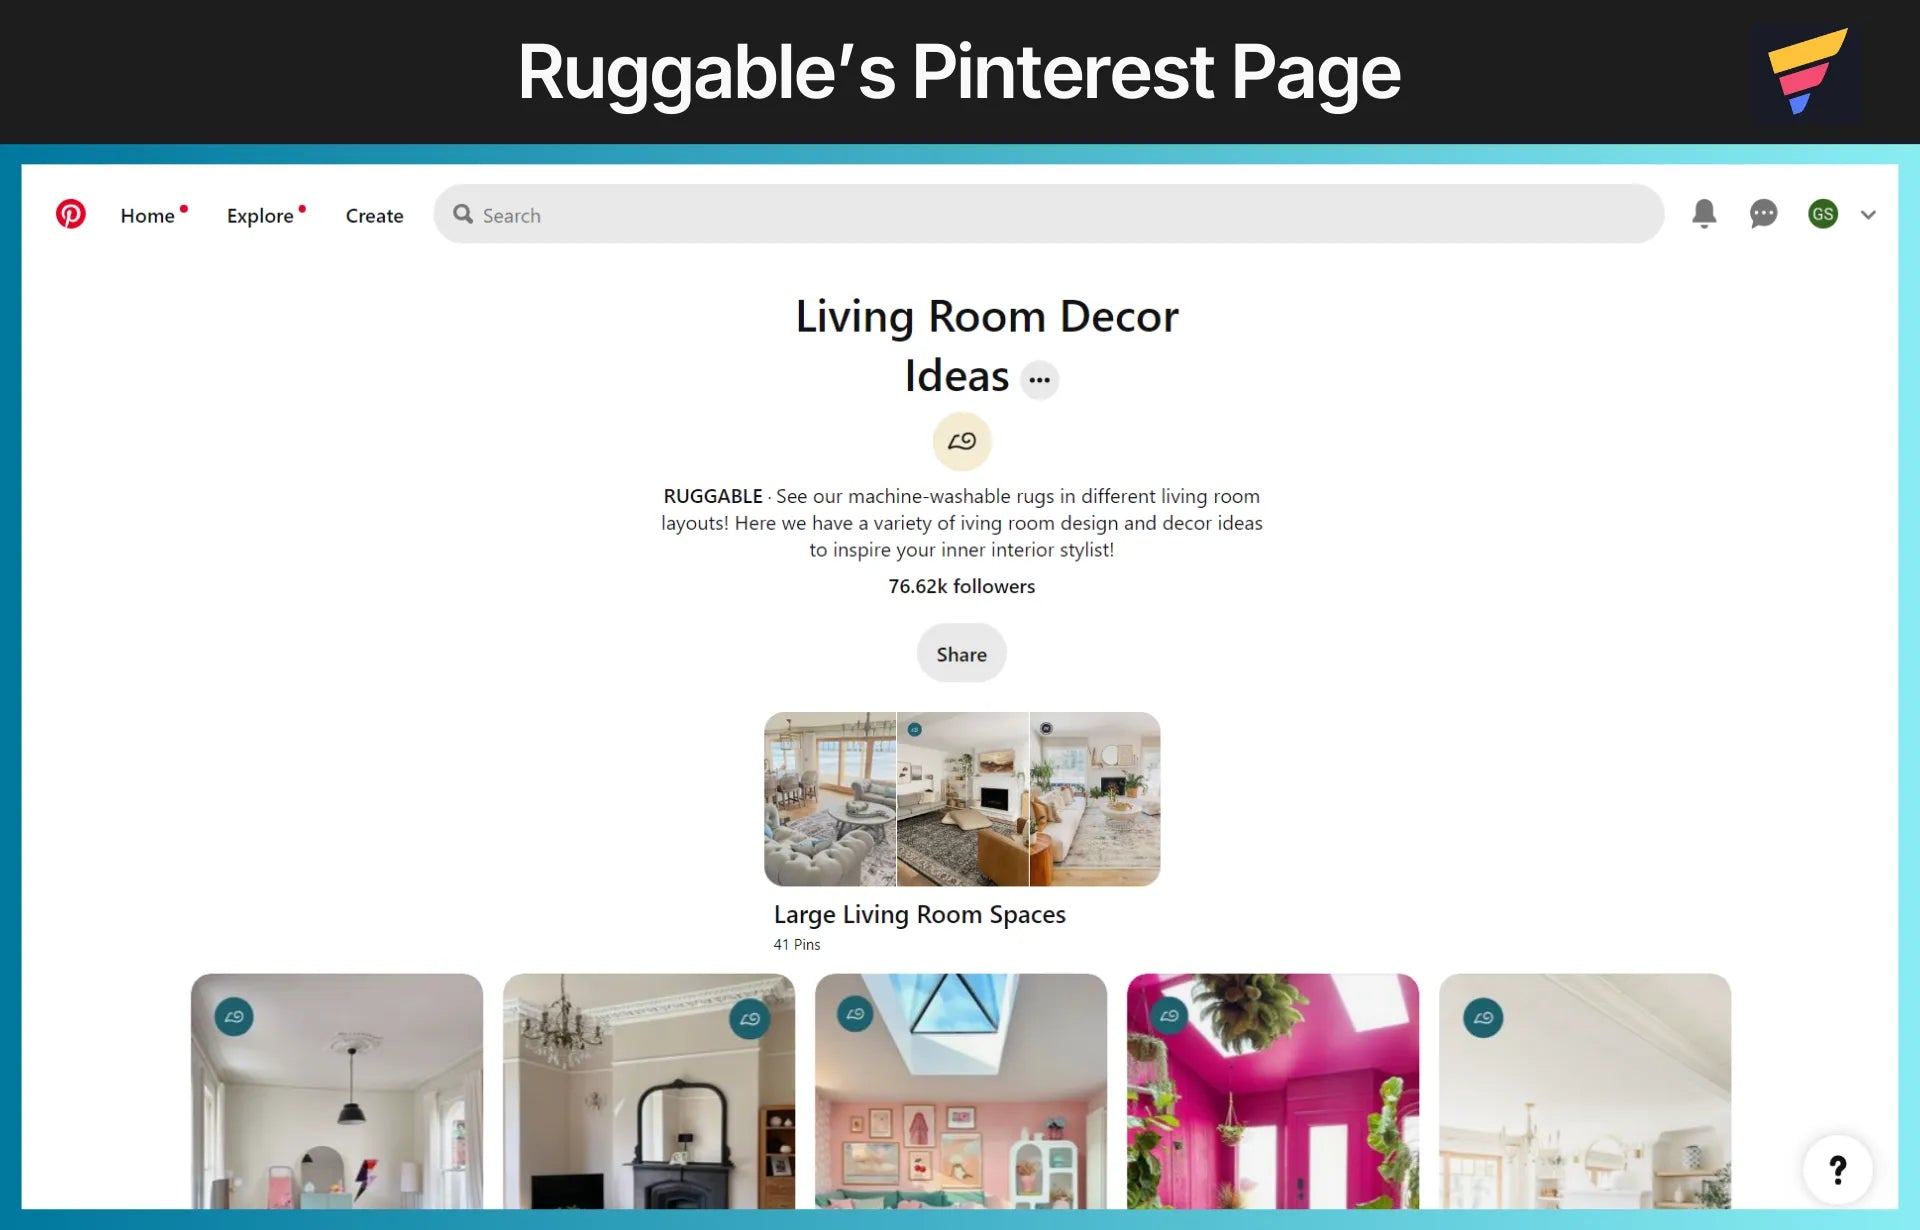 Ruggable’s Pinterest Page